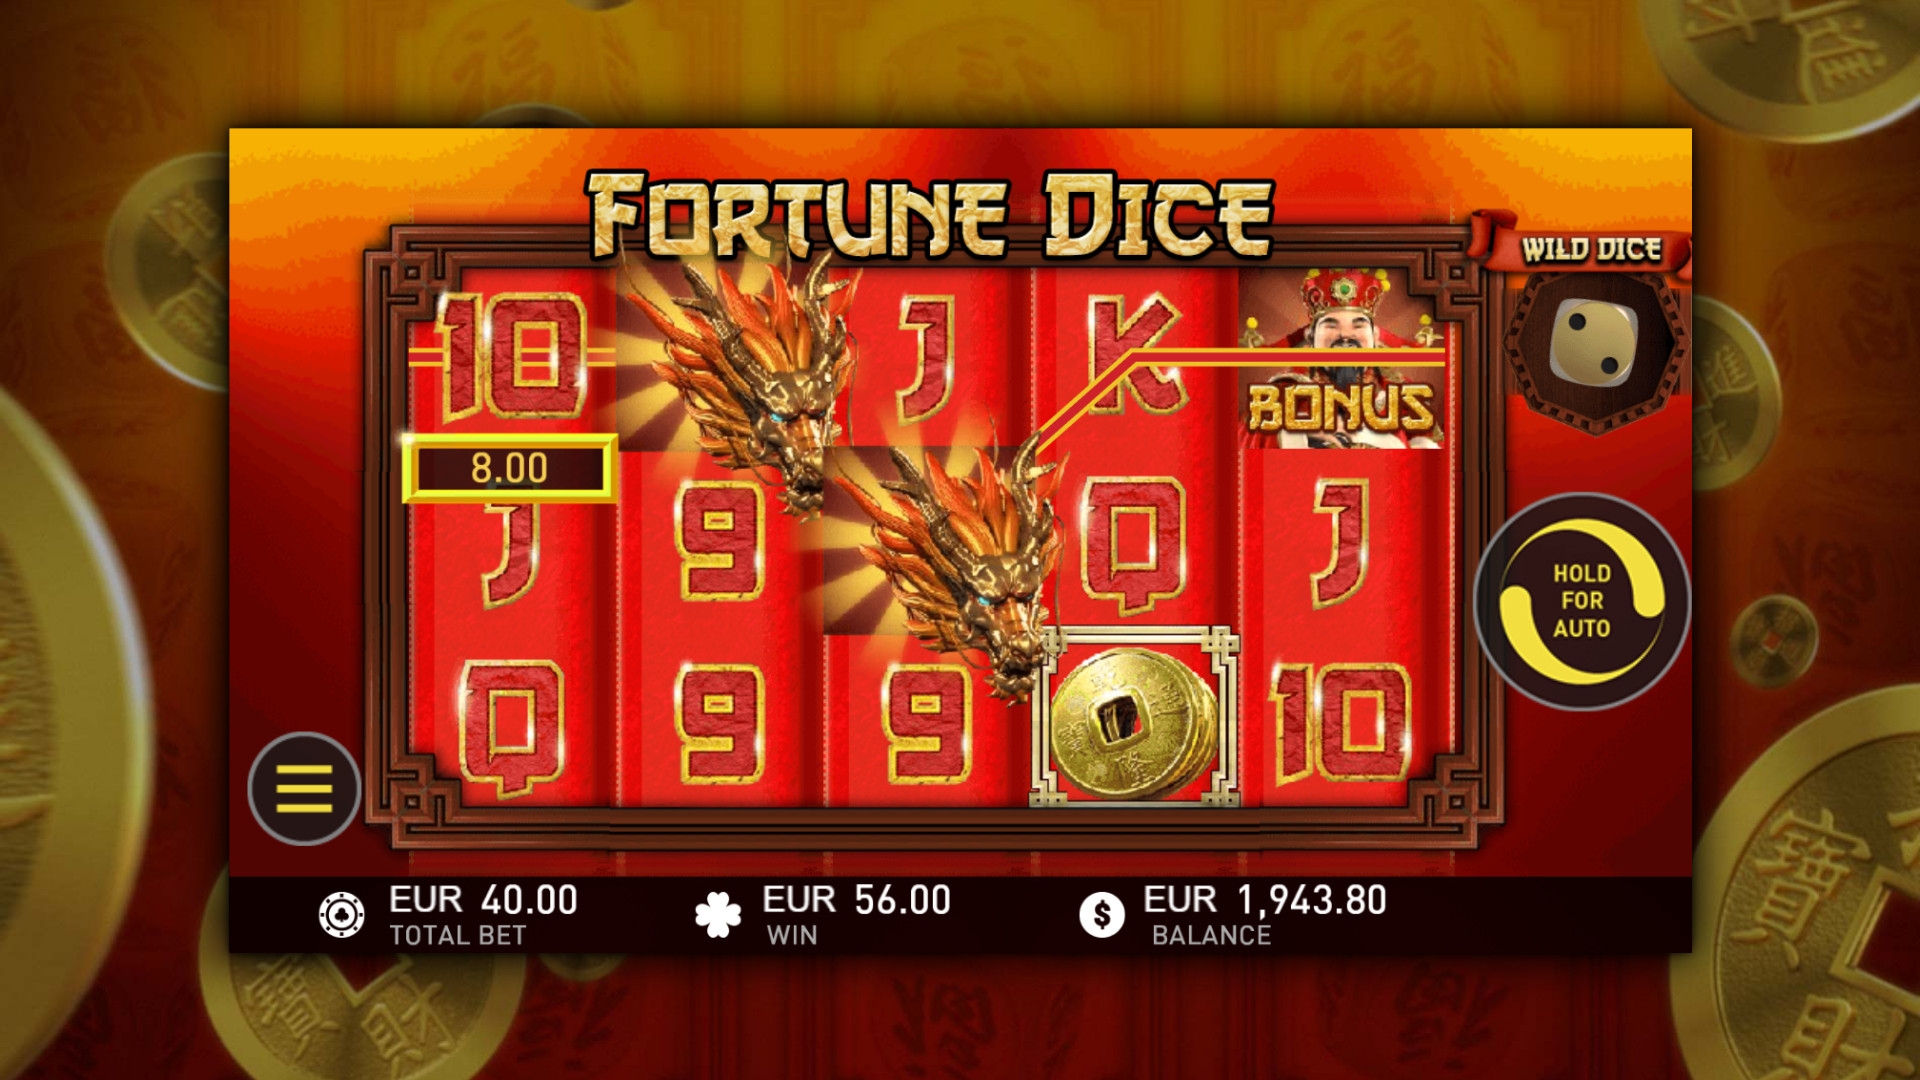 50 fortune dice slot machines online you have